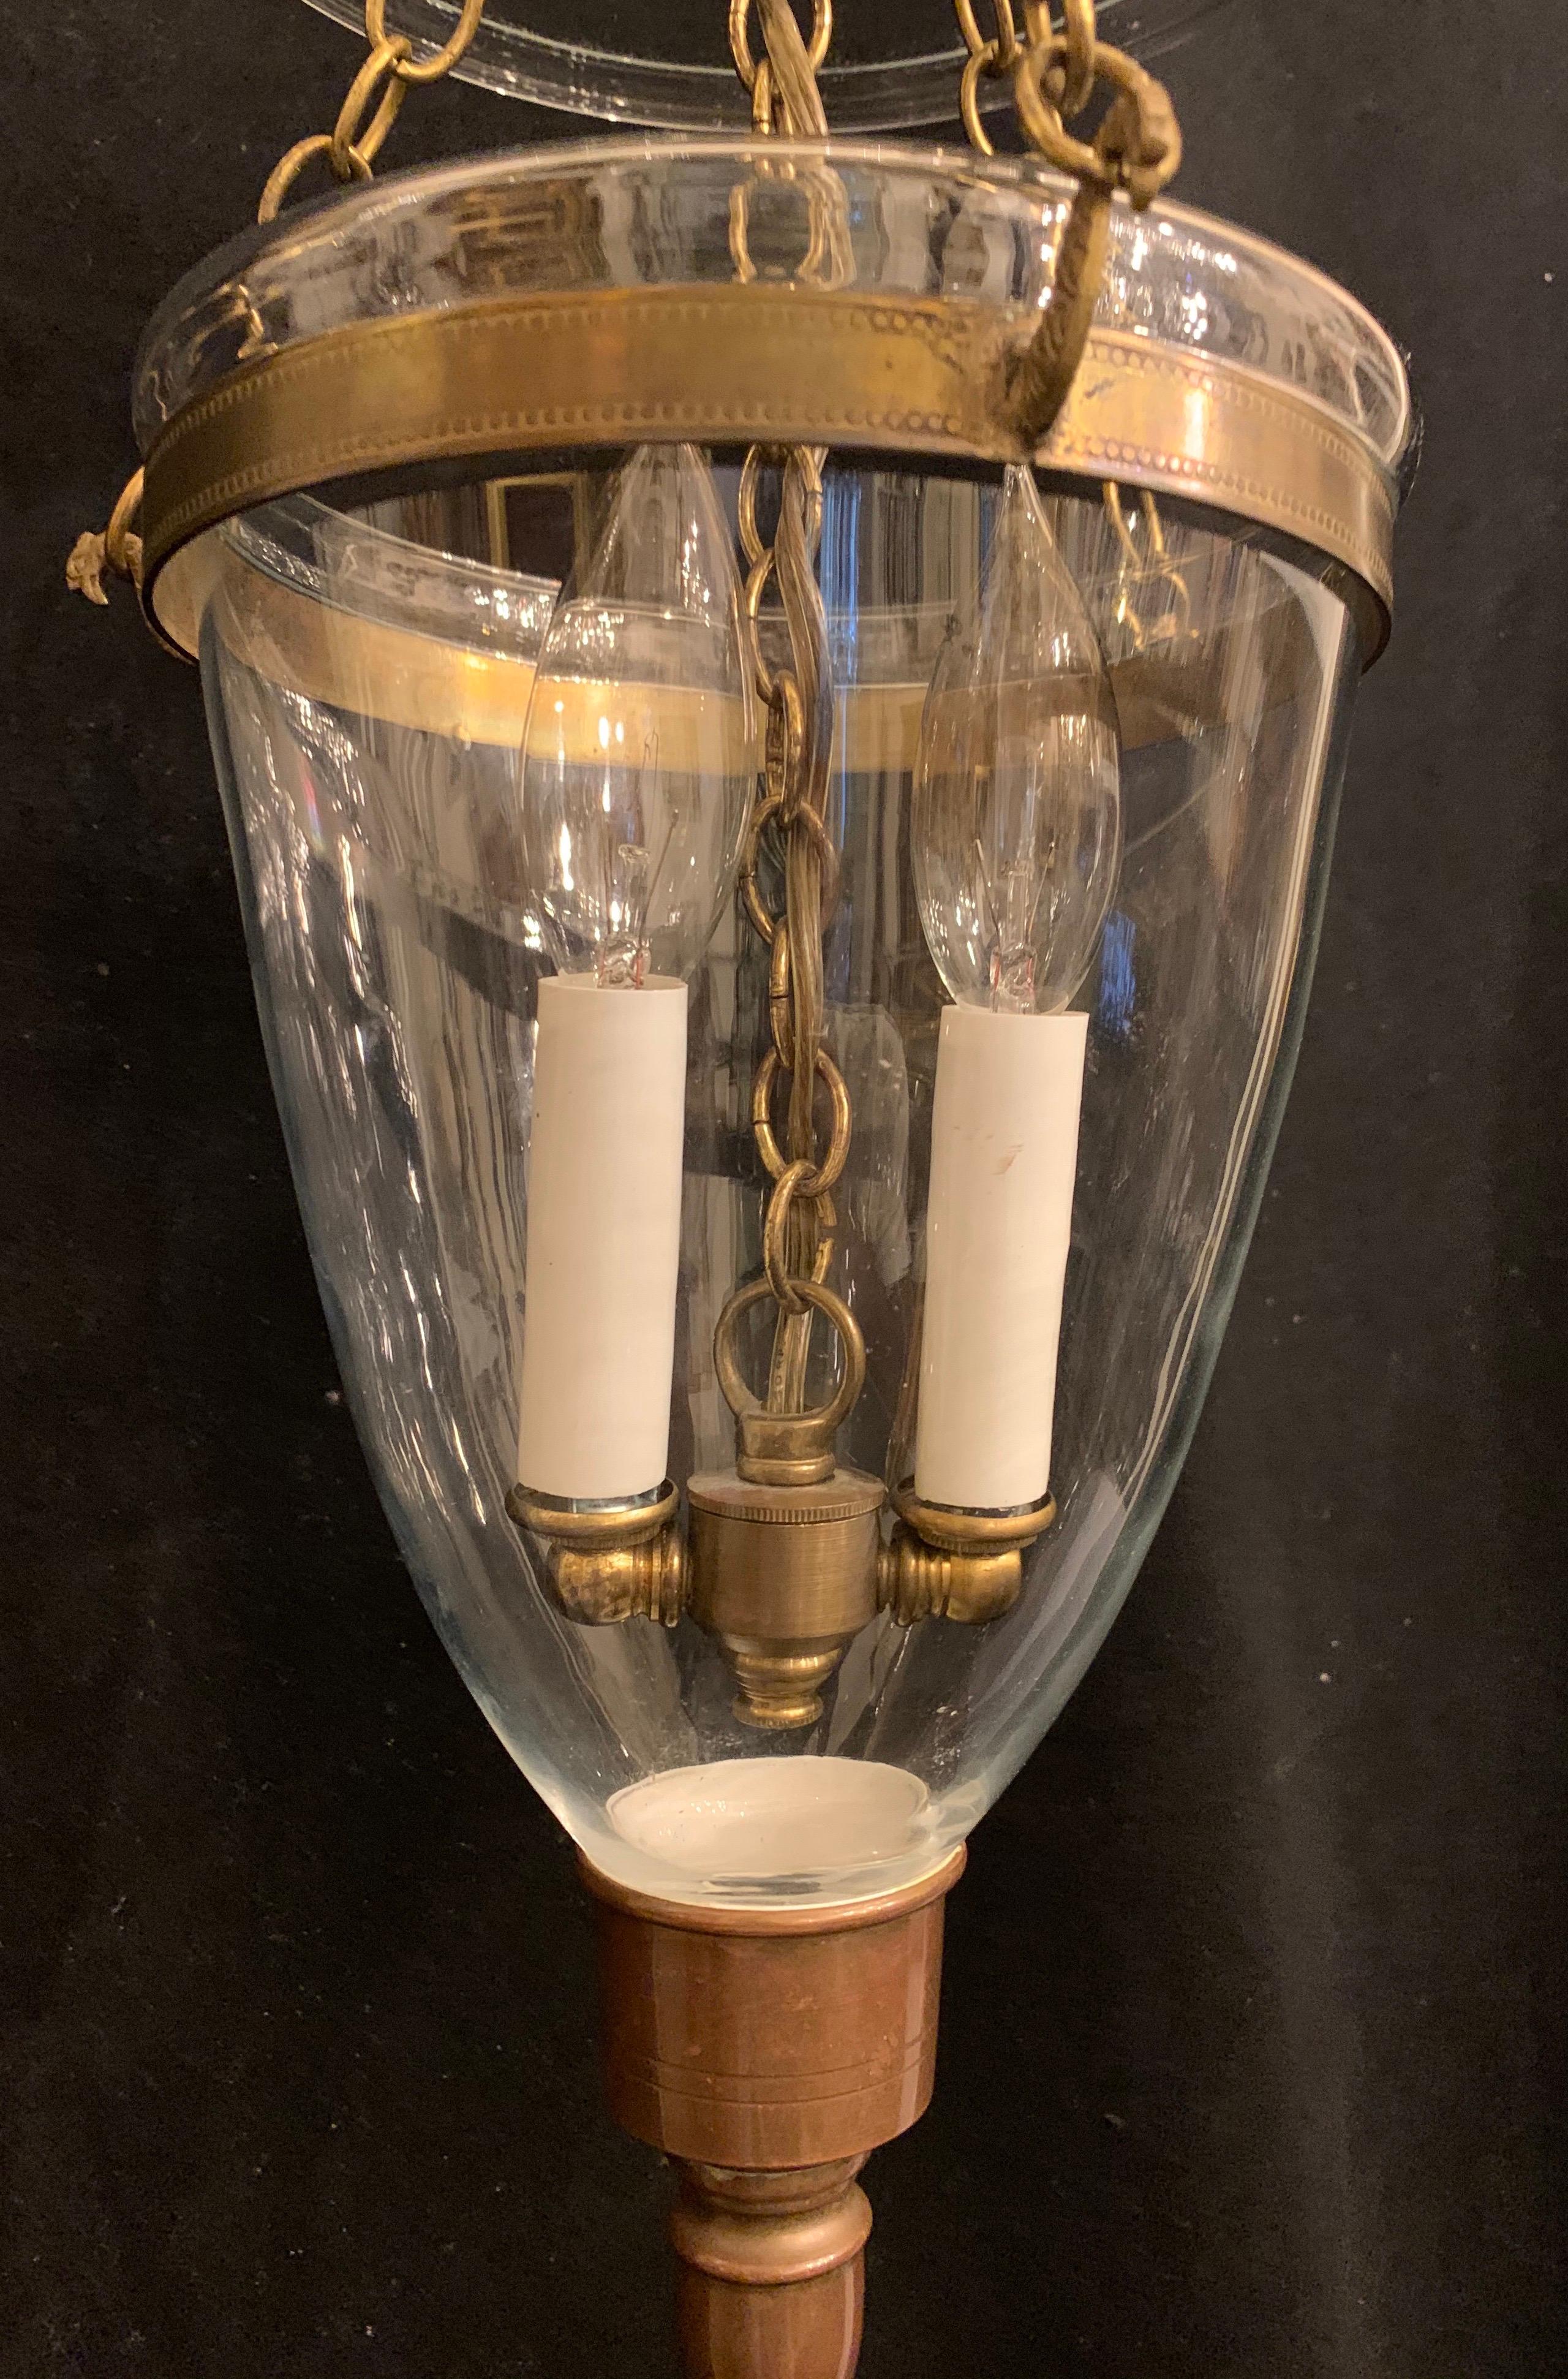 A wonderful set of 3 brass and blown glass English style bell jar lantern 2 light fixtures
Each sold separately.